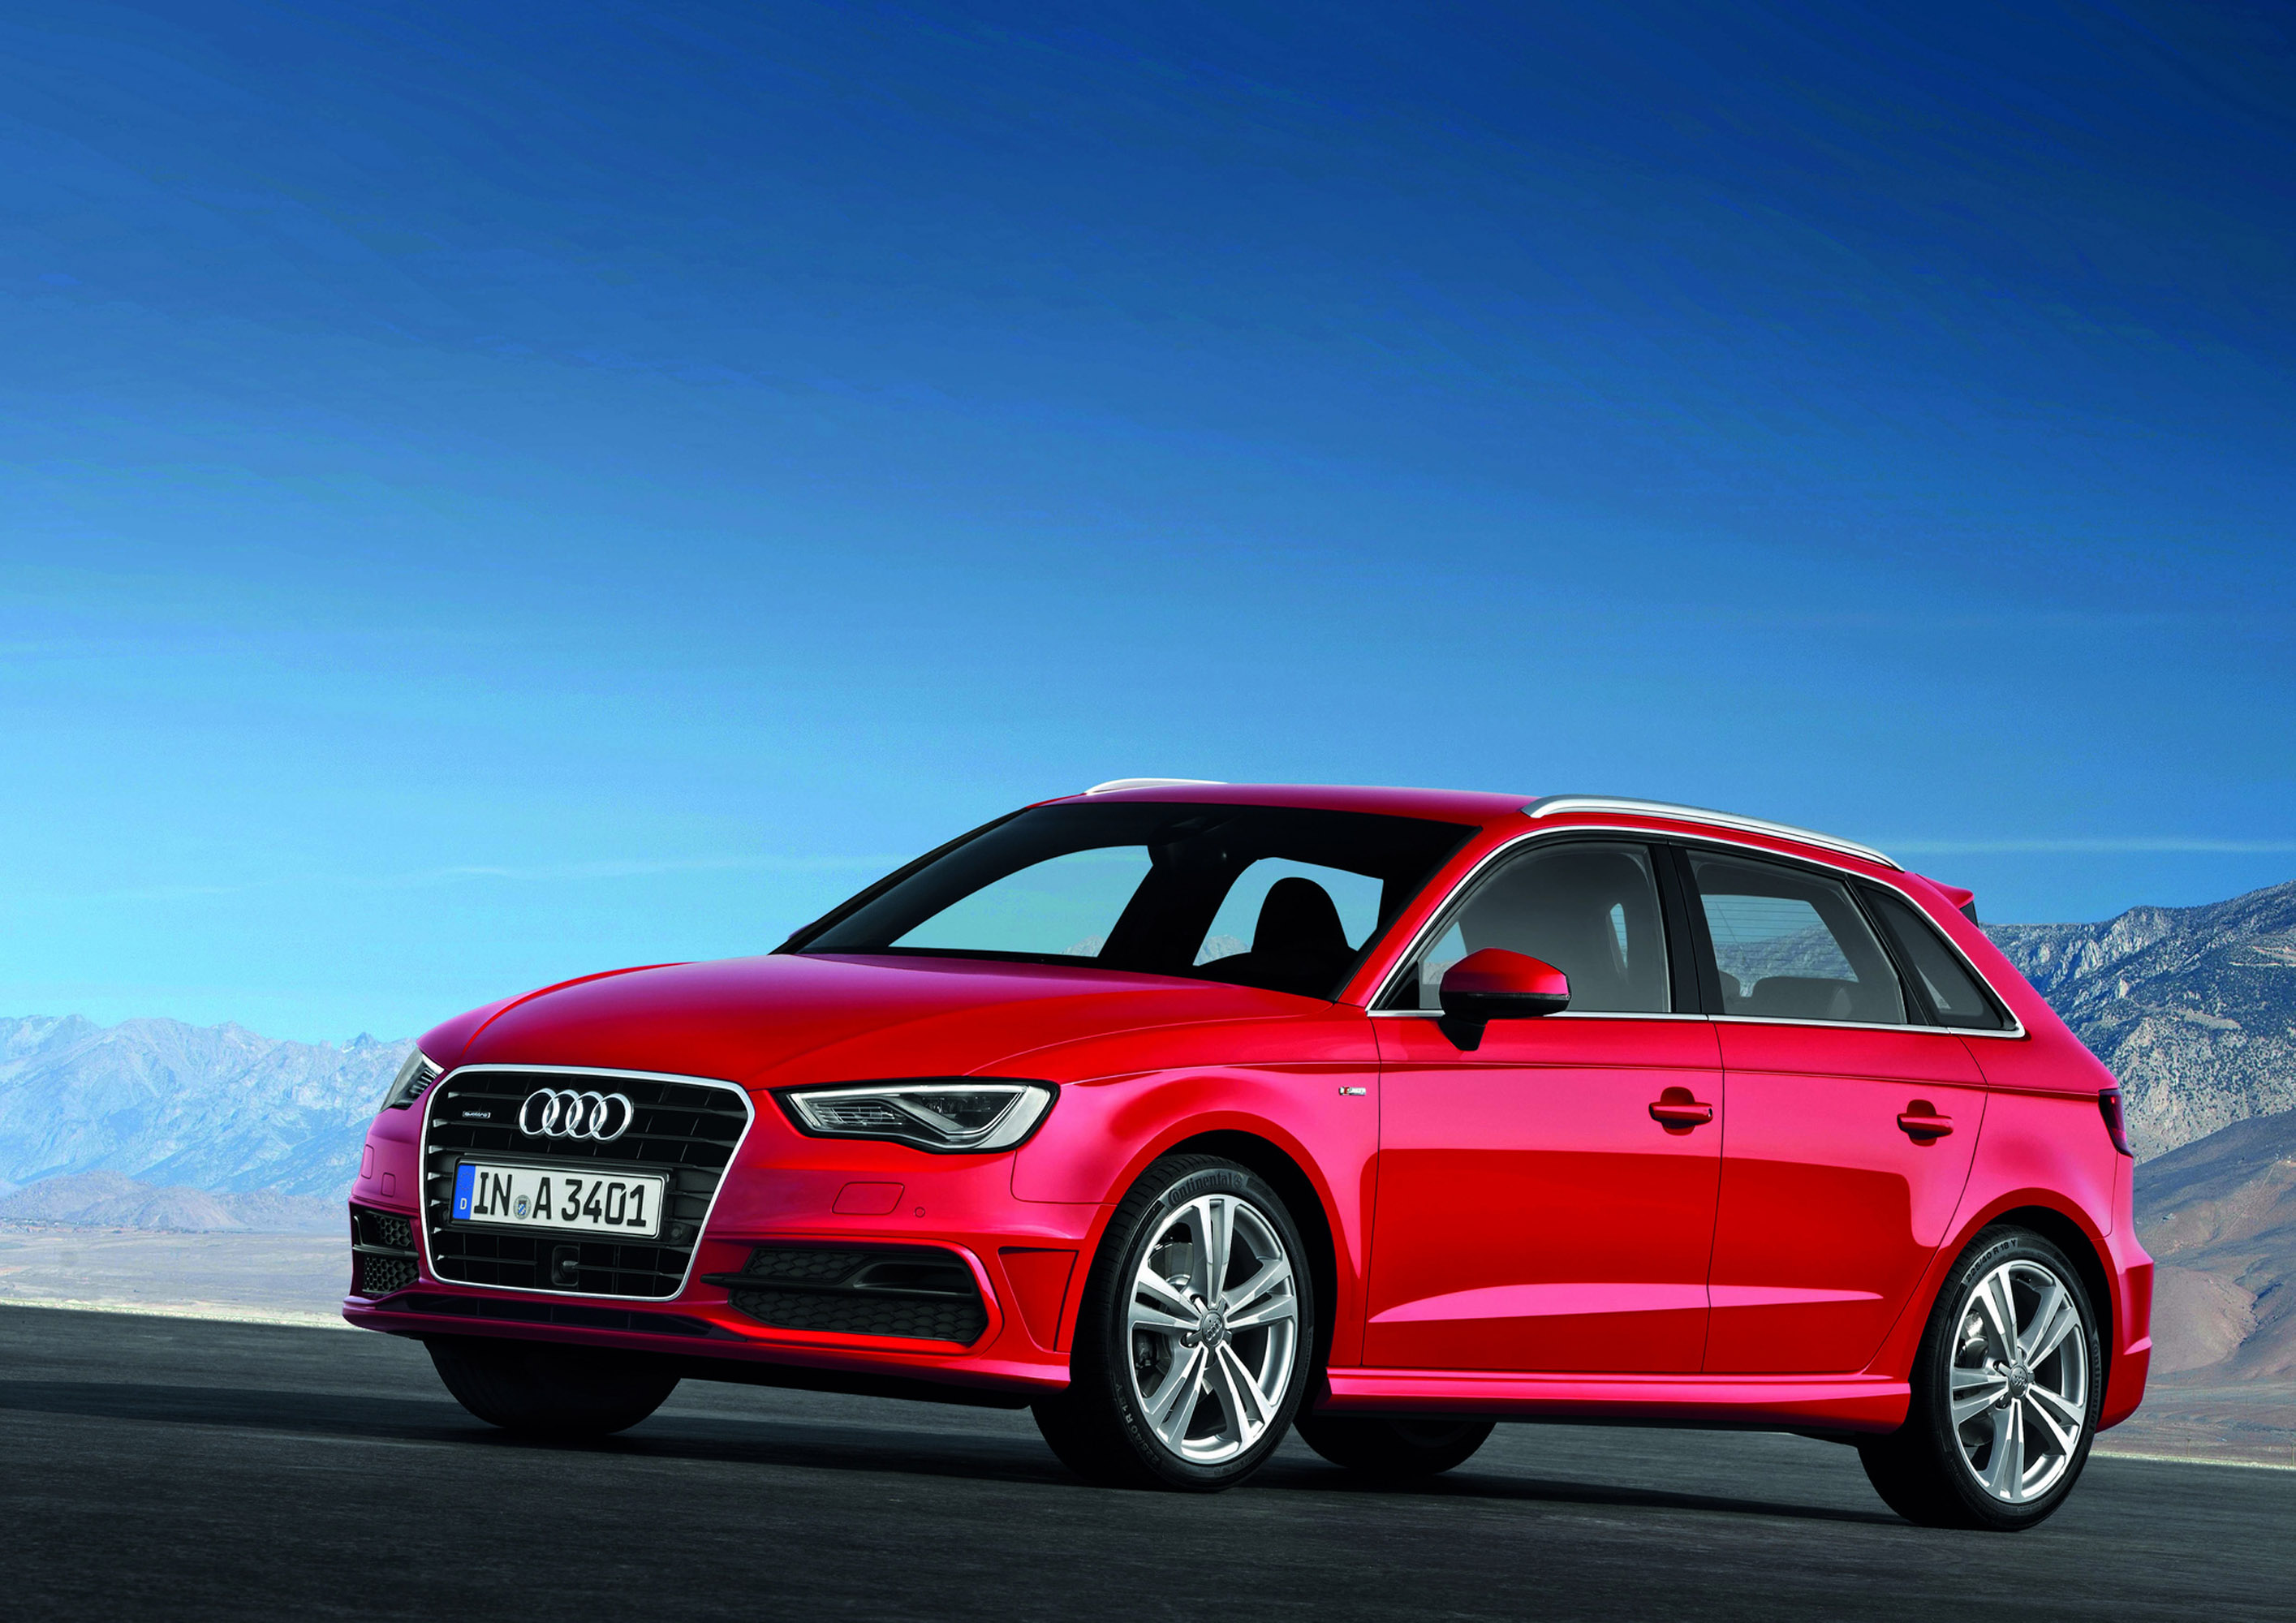 2014 Audi A3 Sportback - HD Pictures @